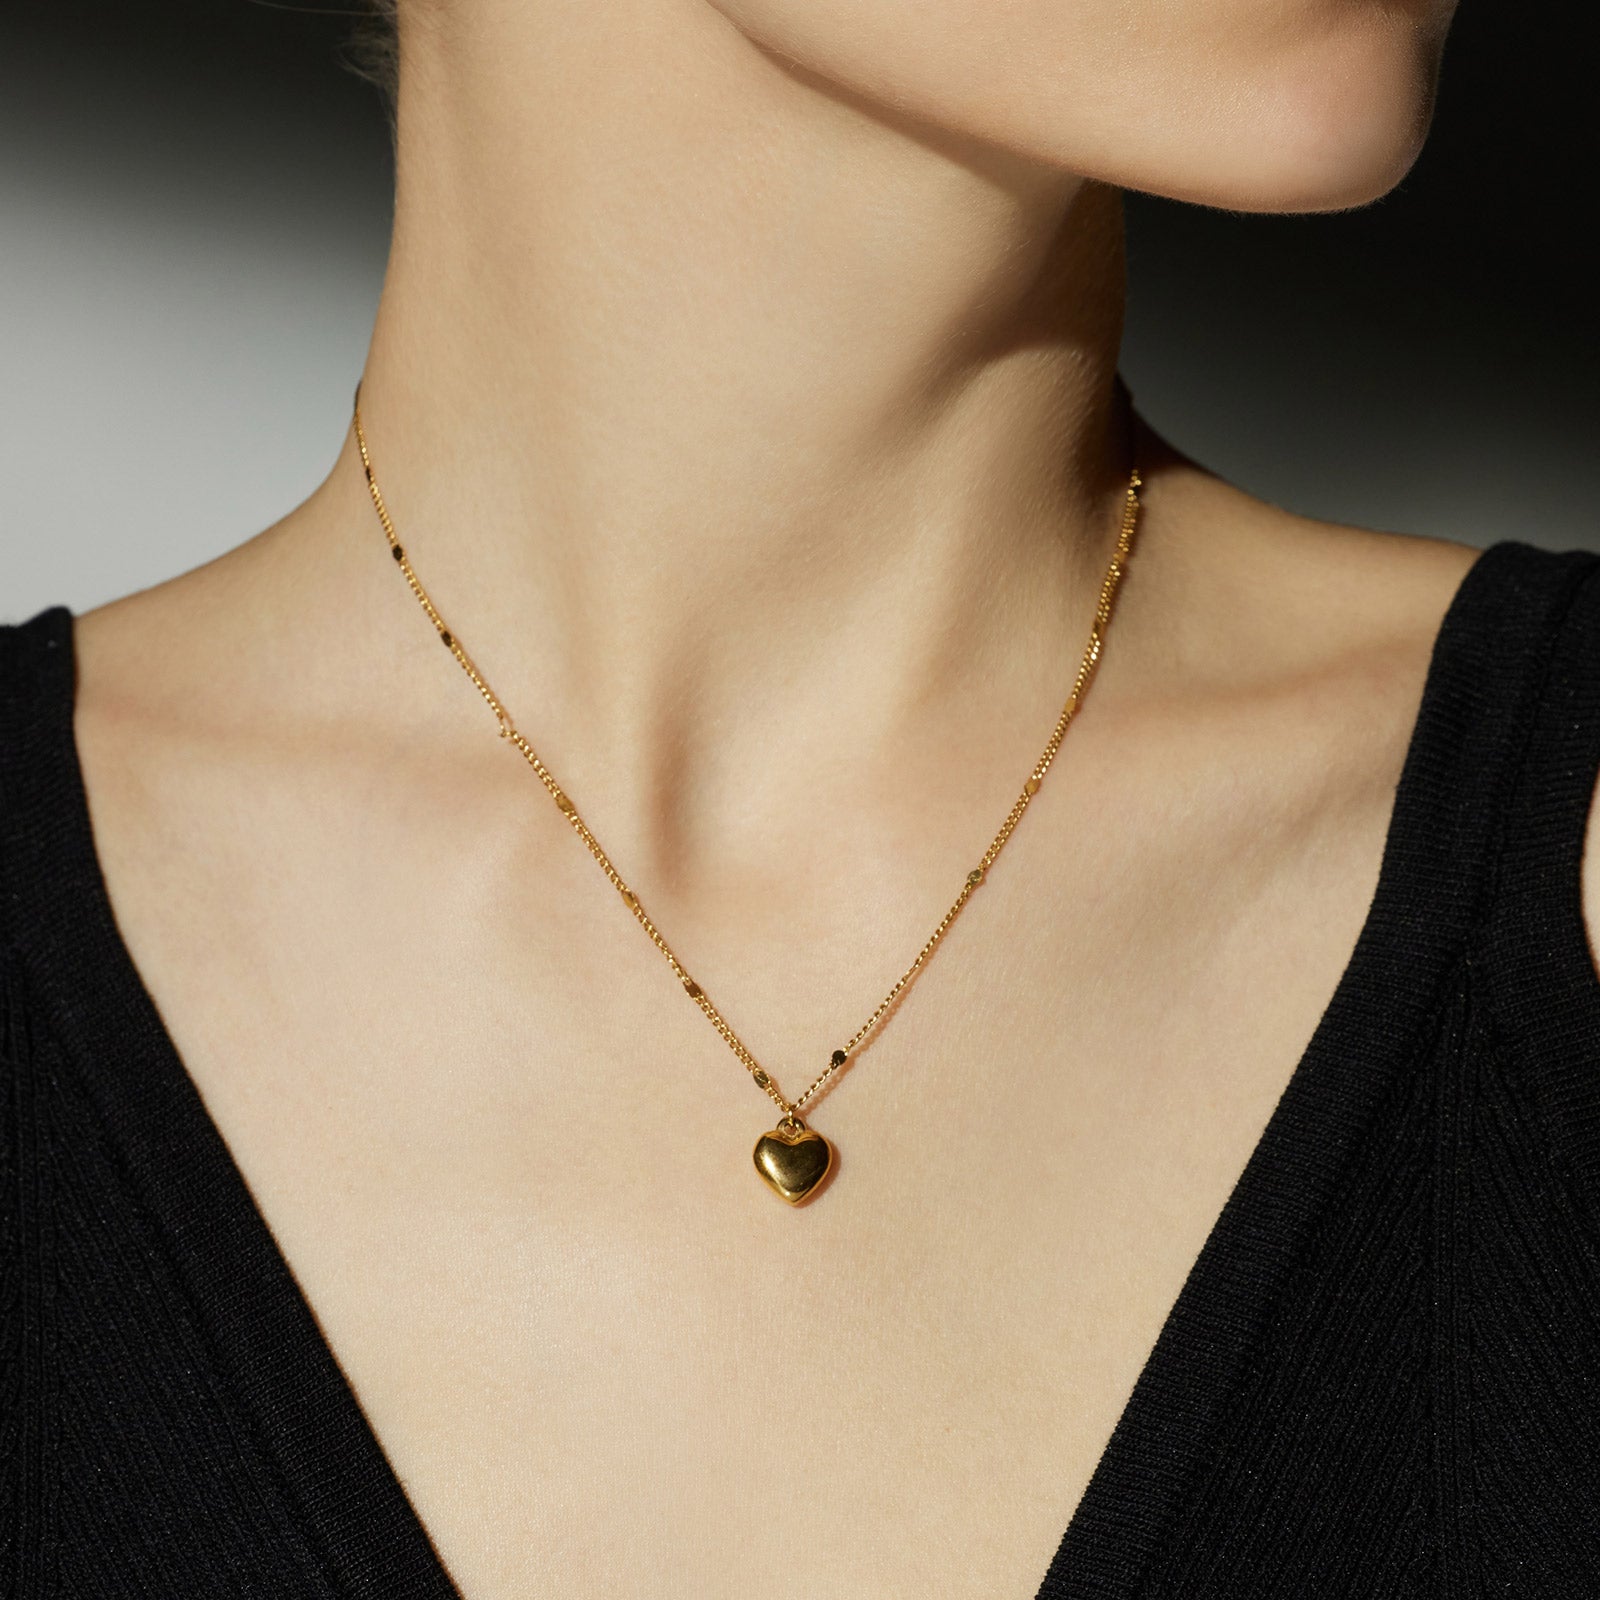 Gold Heart Pendant Necklace, a chic gold accent that enhances your style, featuring a stylish heart-shaped pendant in a lustrous gold hue.